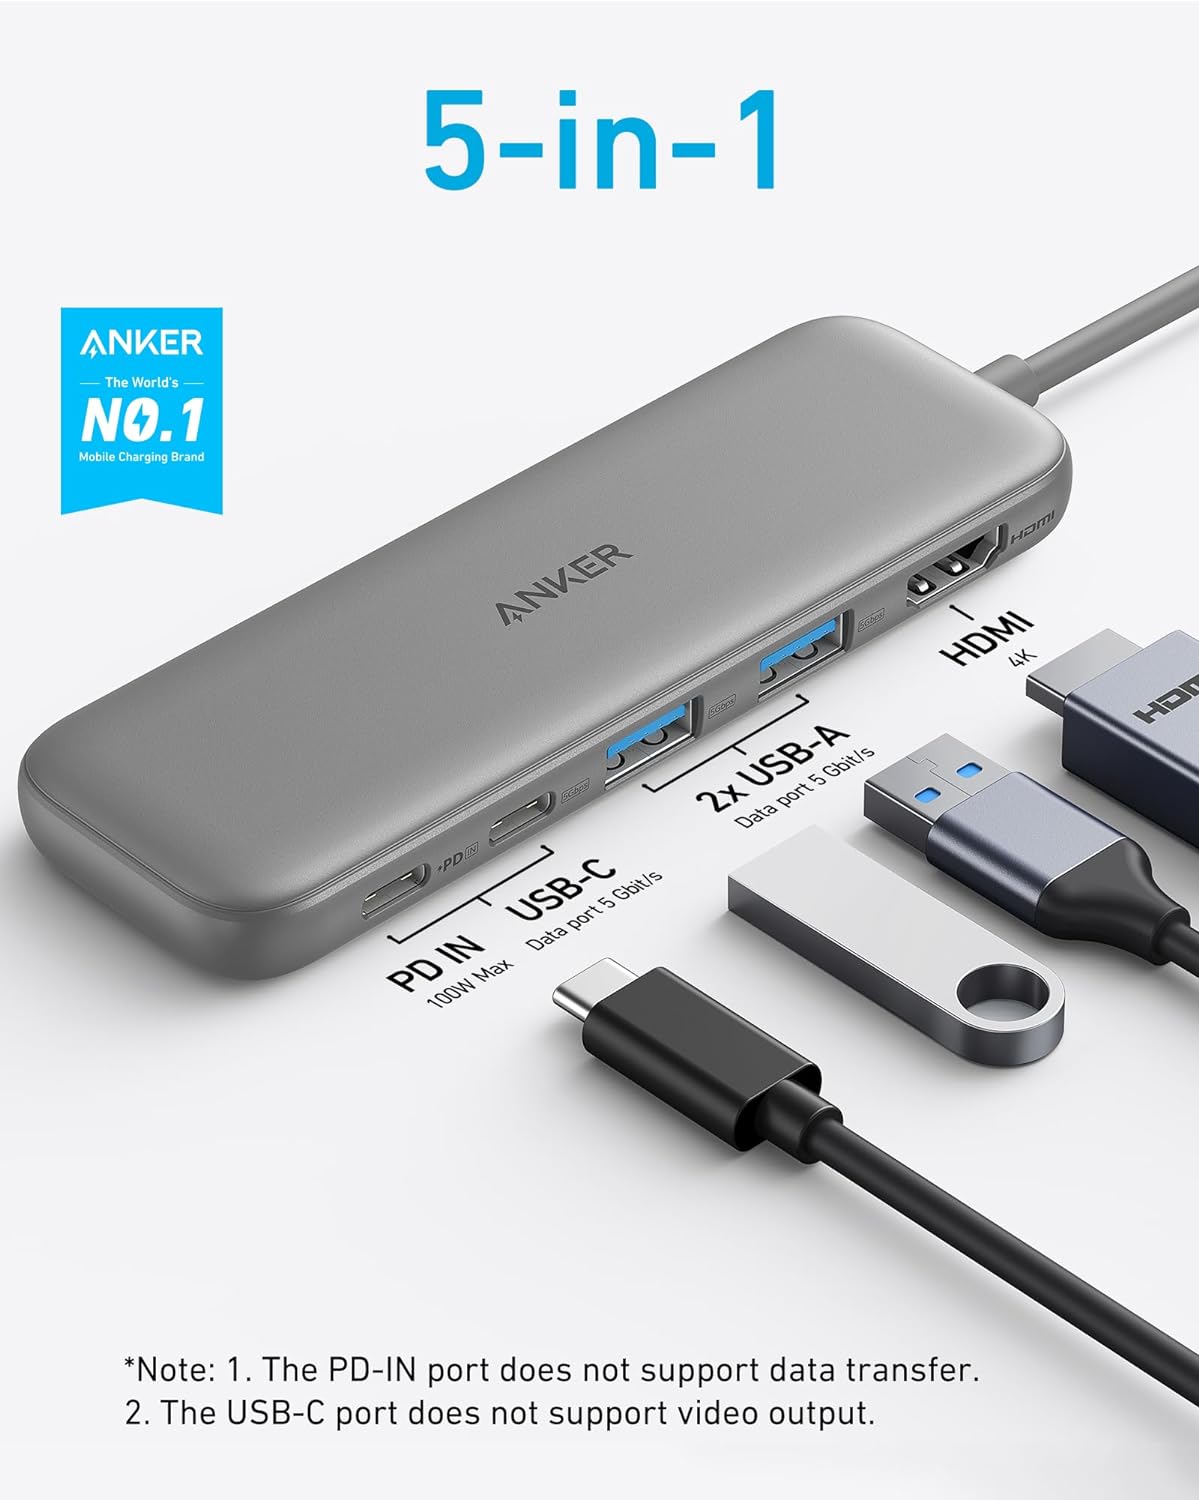 Anker 332 USB-C Hub (5-in-1) with 4K HDMI Display-1